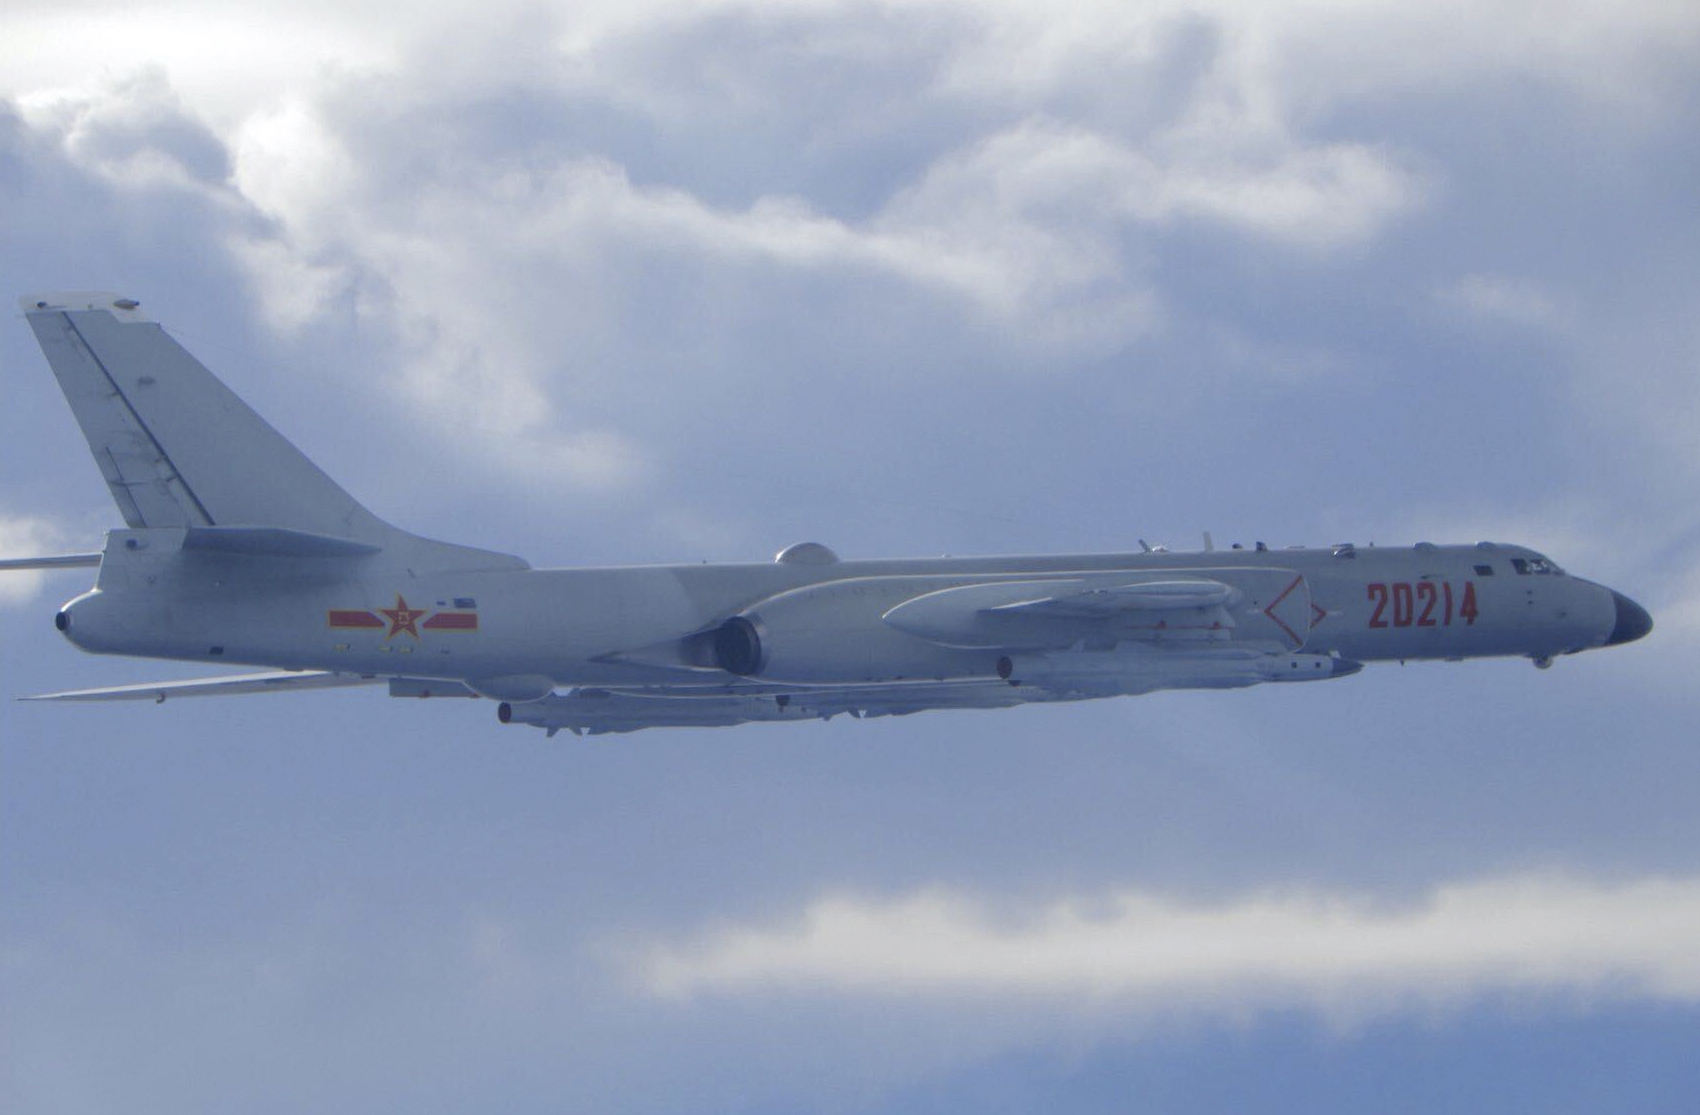 In this photo released by the Taiwan Ministry of National Defense, a Chinese People's Liberation Army H-6 bomber is seen flying near the Taiwan air defense identification zone, ADIZ, near Taiwan on Friday, Sept. 18, 2020. The second high-level U.S. envoy to visit Taiwan in two months began a day of closed-door meetings Friday as China conducted military drills near the Taiwan Strait after threatening retaliation. (Taiwan Ministry of National Defense via AP)